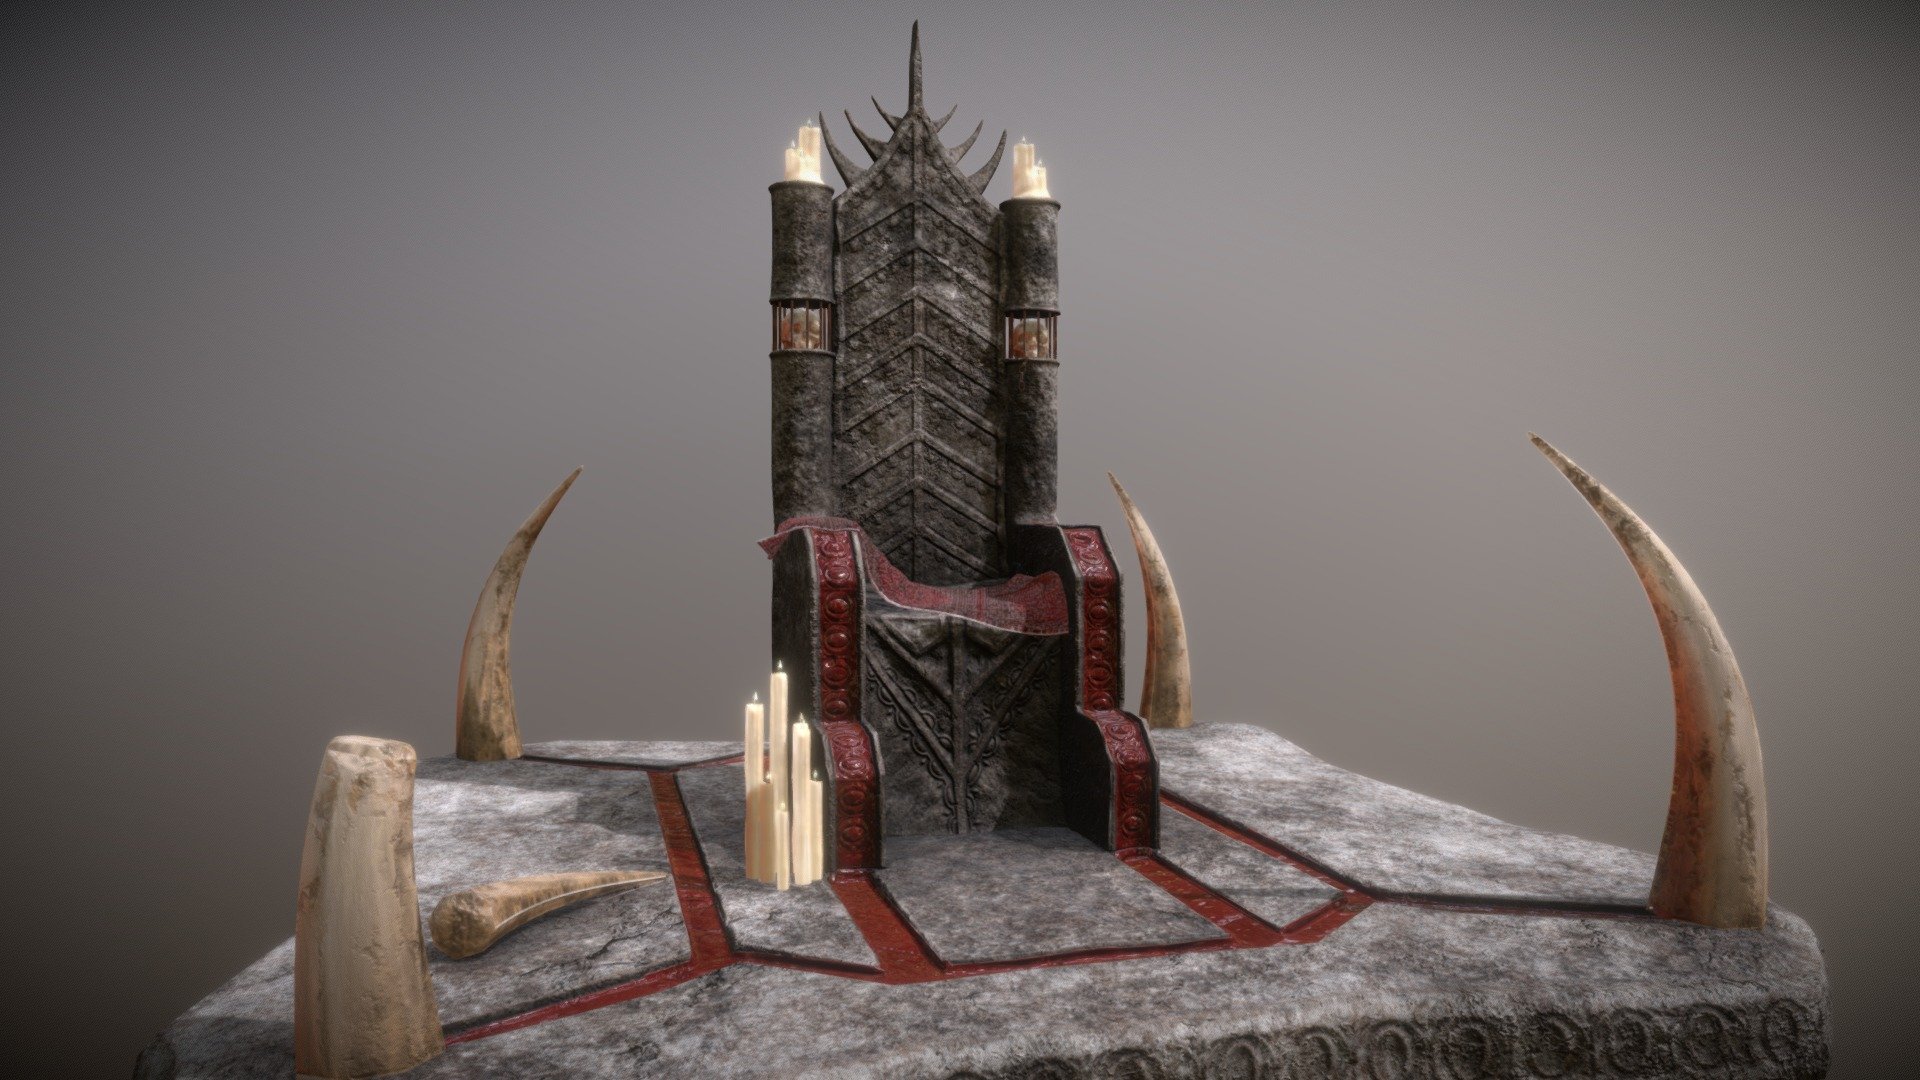 Dark Gothic Medieval Throne 3D Model. This model contains the Dark Gothic Medieval Throne itself 

All modeled in Maya, textured with Substance Painter.

The model was built to scale and is UV unwrapped properly. 

This model was textured with the UDIM pipeline.   

⦁   34711 tris. 

⦁   Contains: .FBX .OBJ and .DAE

⦁   Model has clean topology. No Ngons.

⦁   Built to scale

⦁   Unwrapped UV Map

⦁   4K Texture set. UDIM - 3 Quadrants

⦁   High quality details

⦁   Based on real life references

⦁   Renders done in Marmoset Toolbag

Polycount: 

Verts 17954

Edges 35337

Faces 17426

Tris 34711

If you have any questions please feel free to ask me 3d model